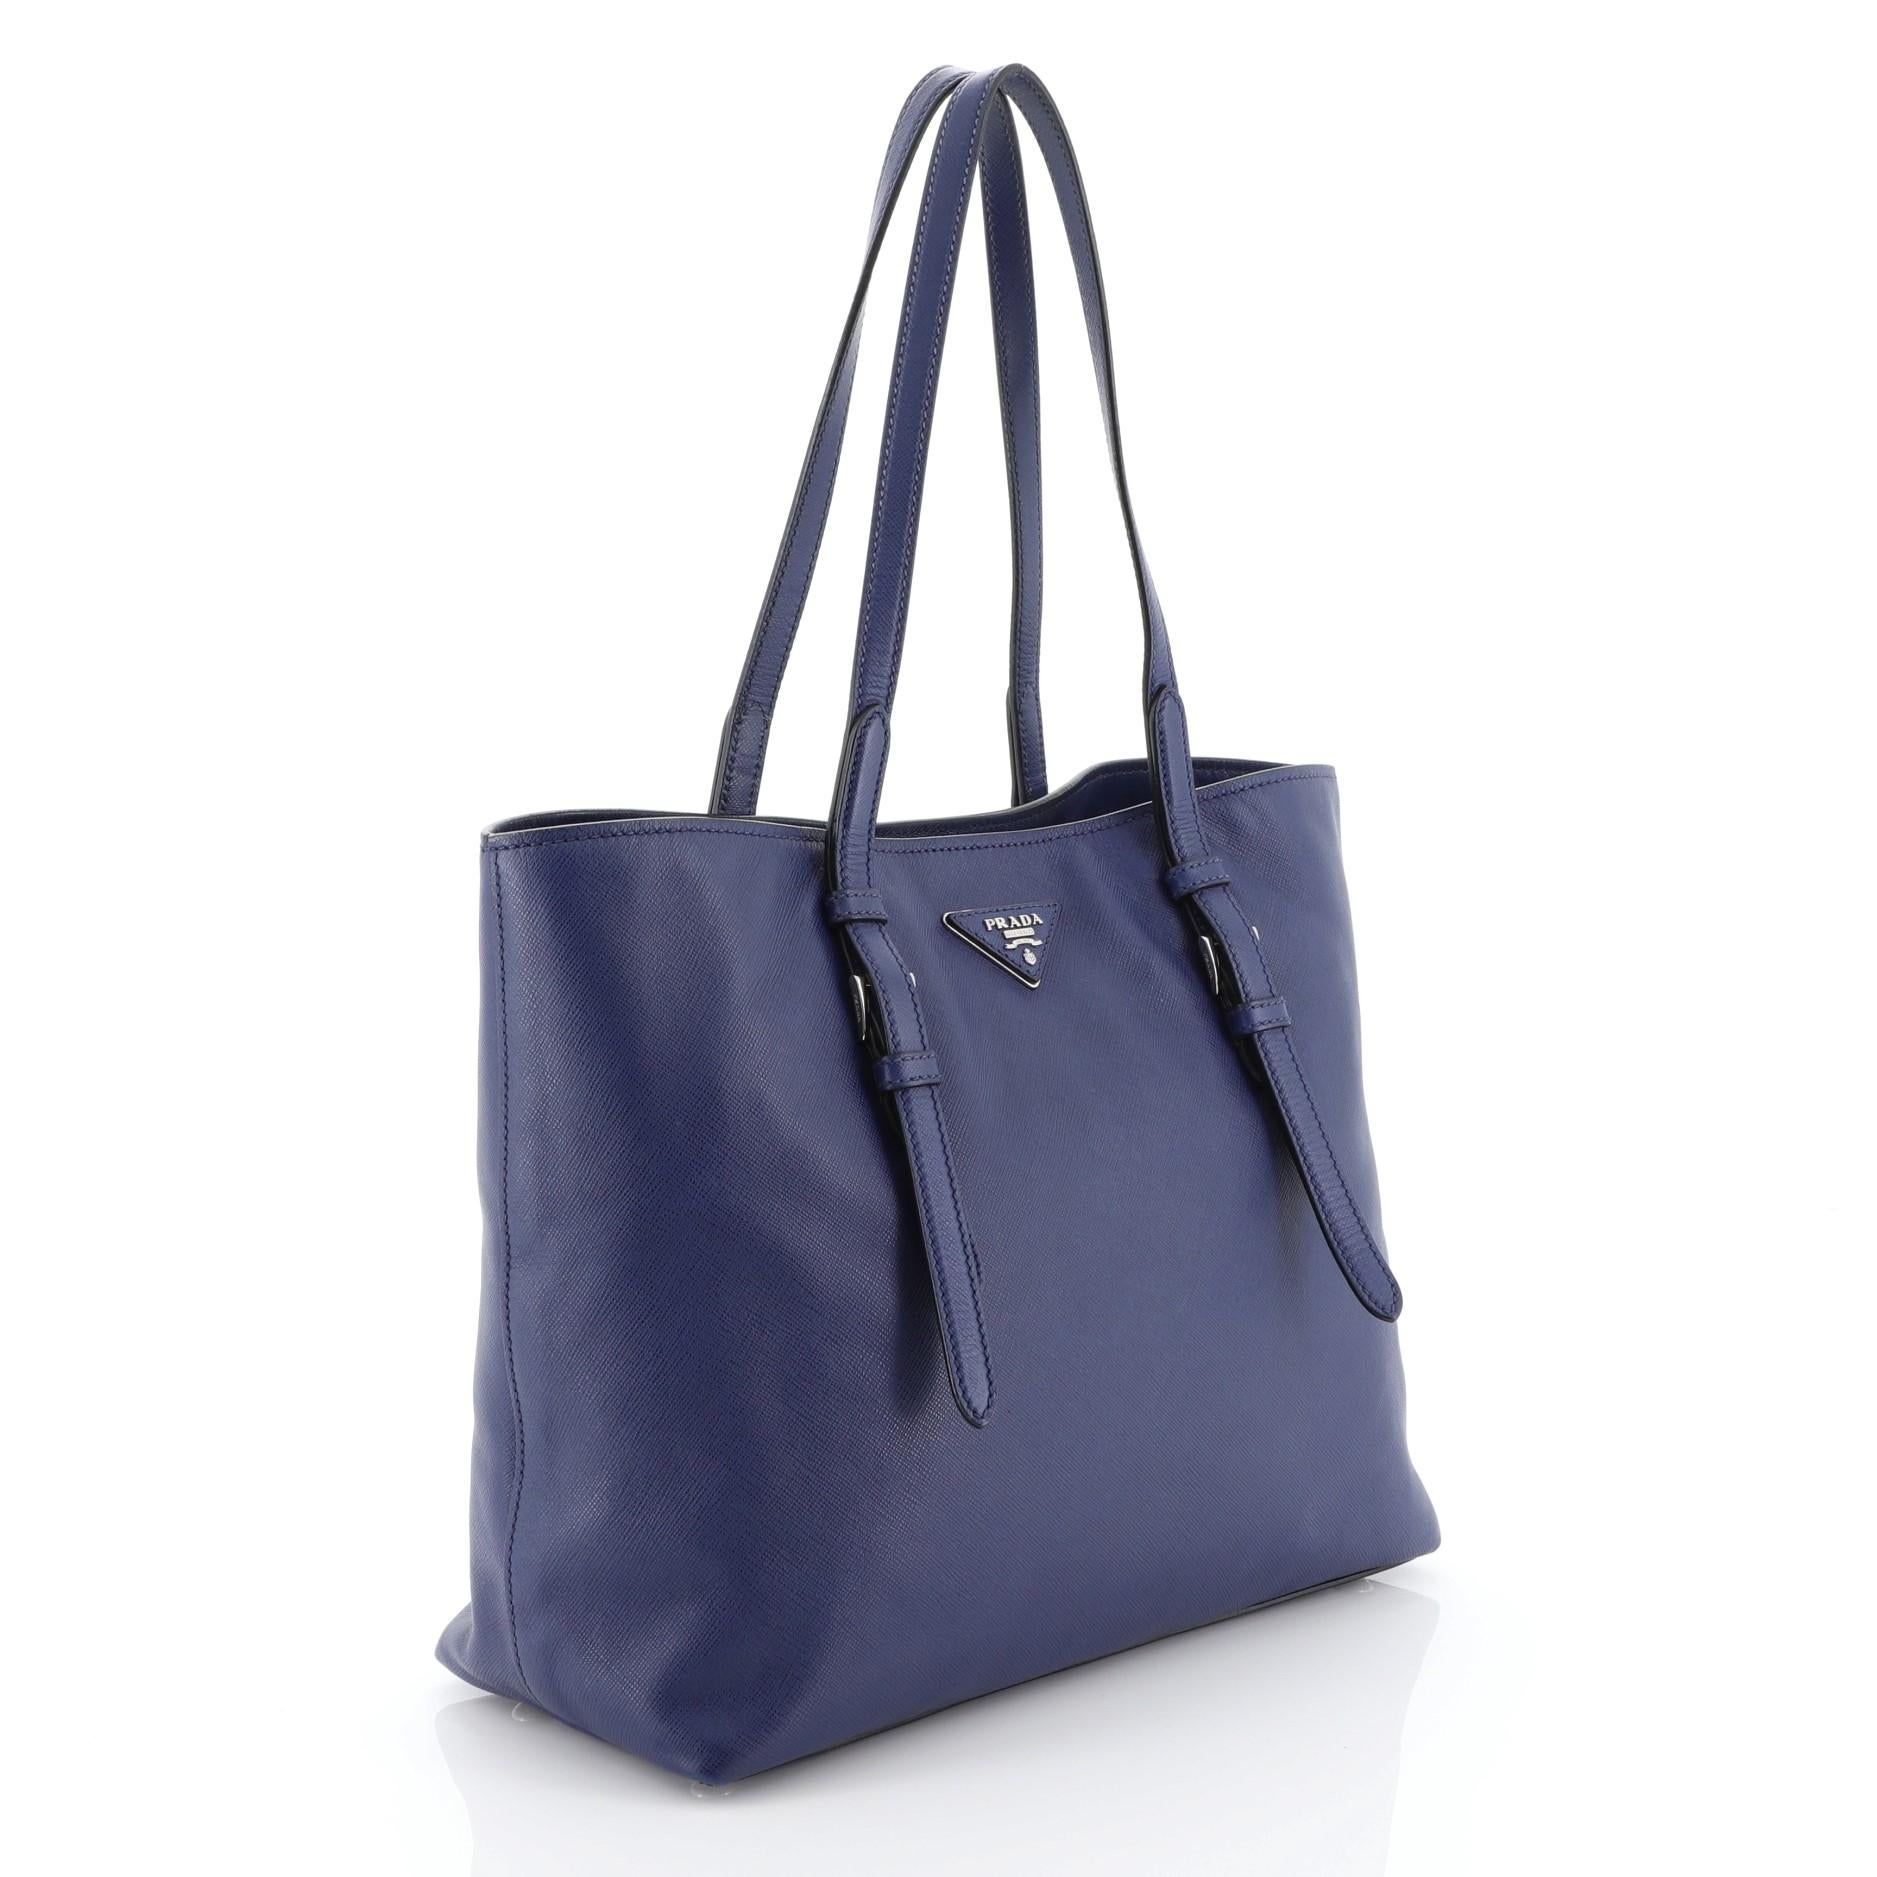 This Prada Belted Soft Tote Saffiano Leather Medium, crafted in blue saffiano leather, features dual flat leather handles with belted accent, protective base studs, triangle logo at the center and silver-tone hardware. Its magnetic snap closure